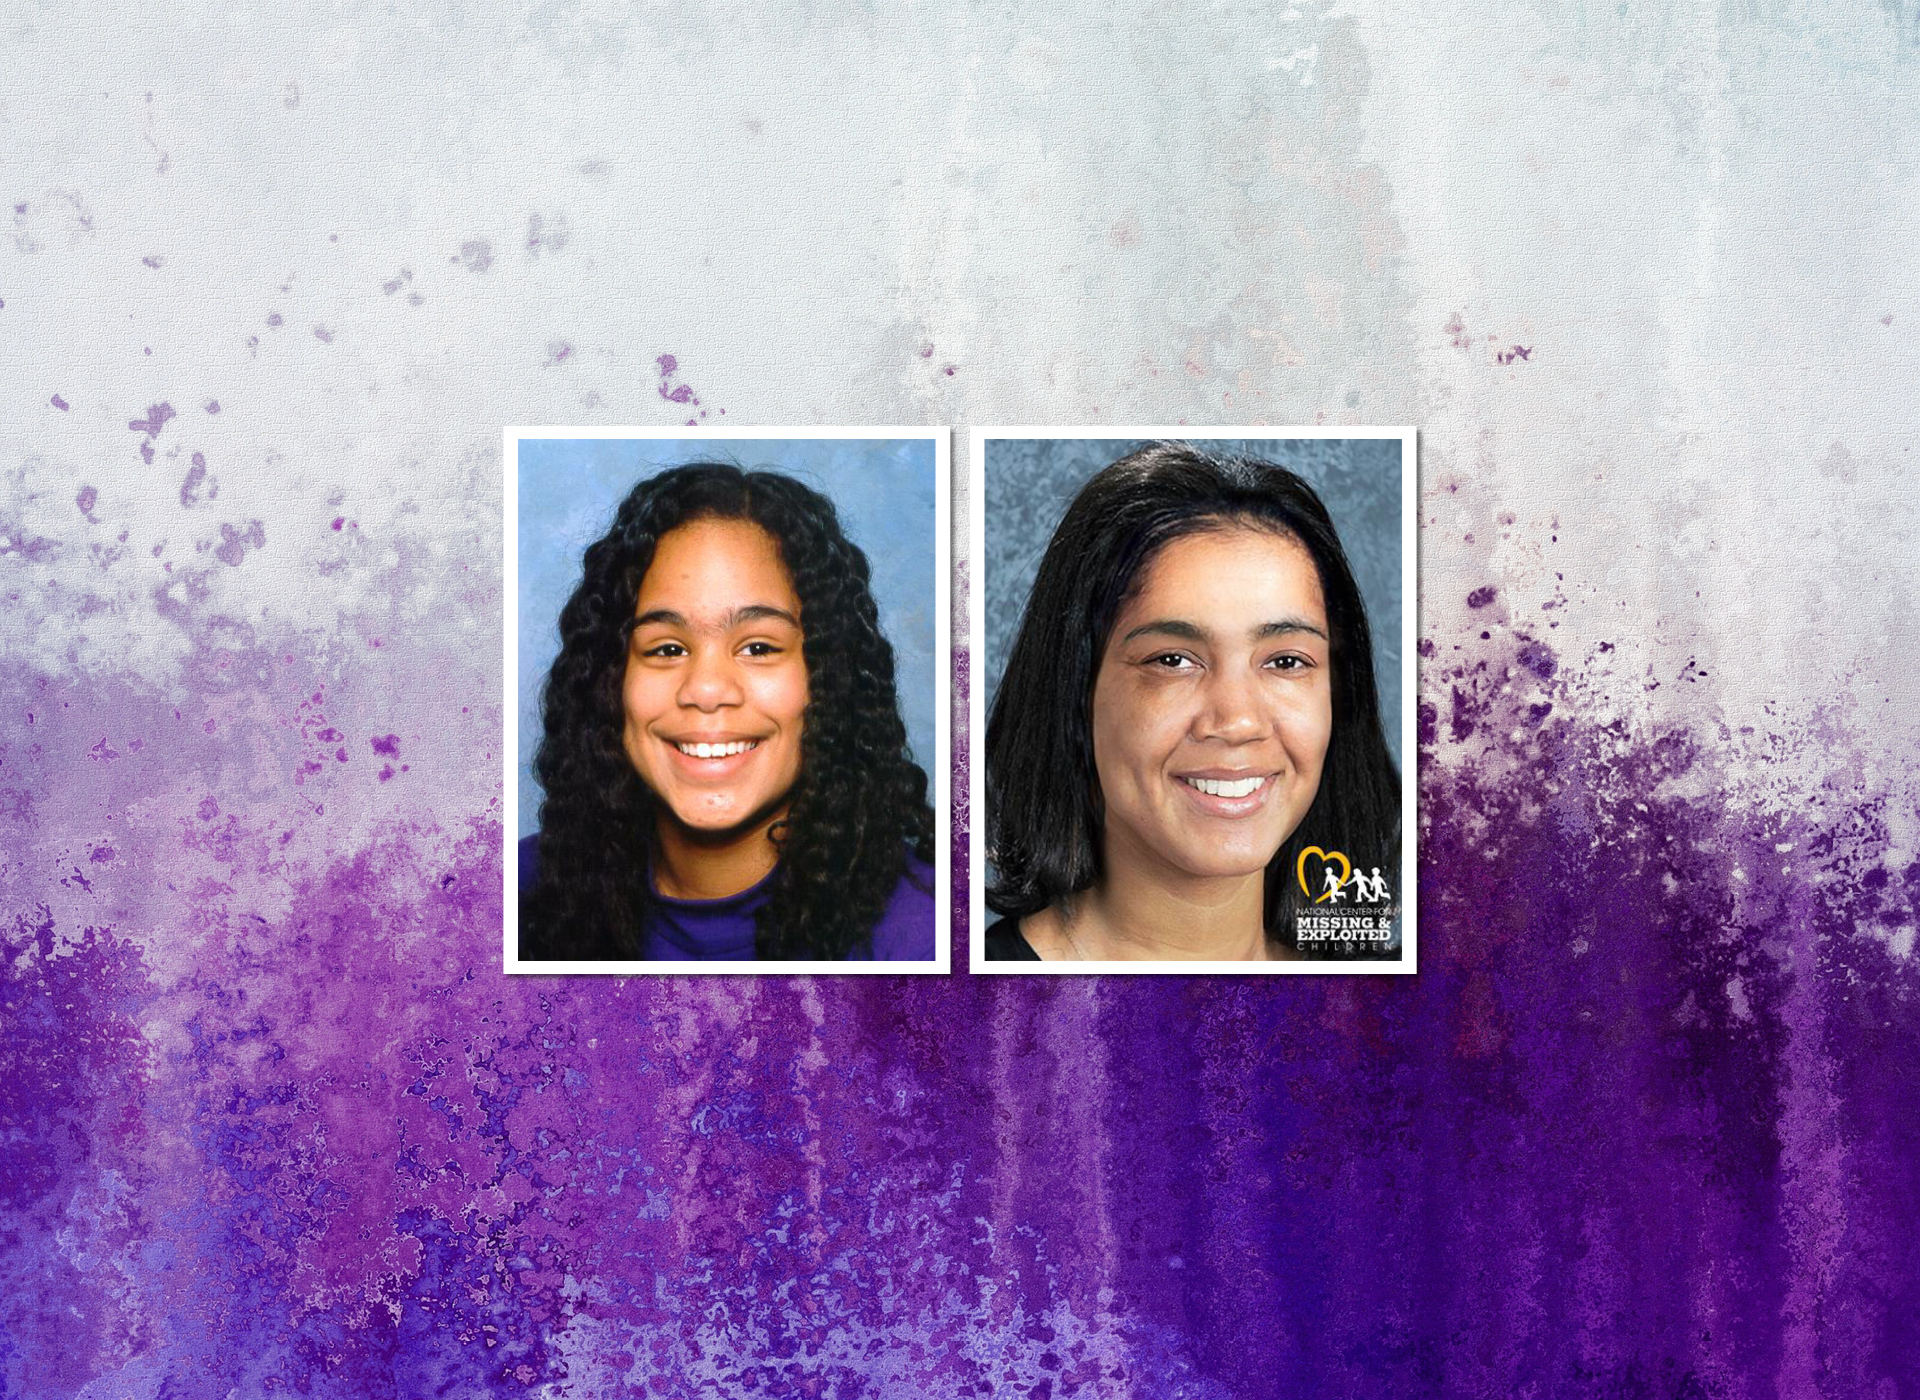 two photos: (l) celina at age 12 has long curly dark hair, a big smile, and a medium complexion; (r) celina age progressed to 33; both pictures are against a white and purple background